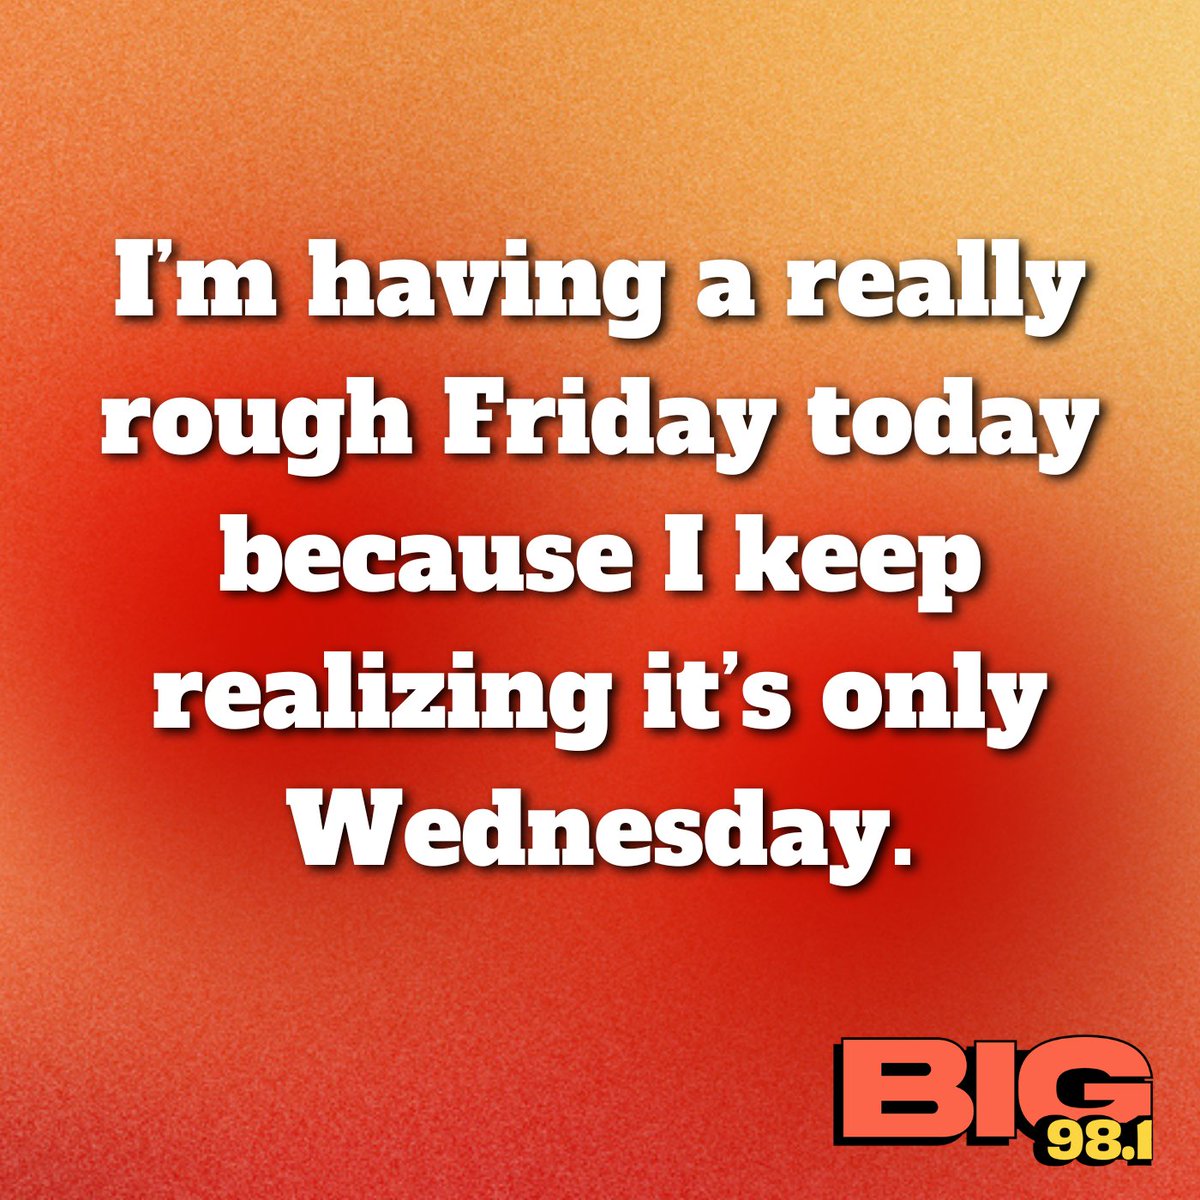 The struggle is real today 😂 #BIG981